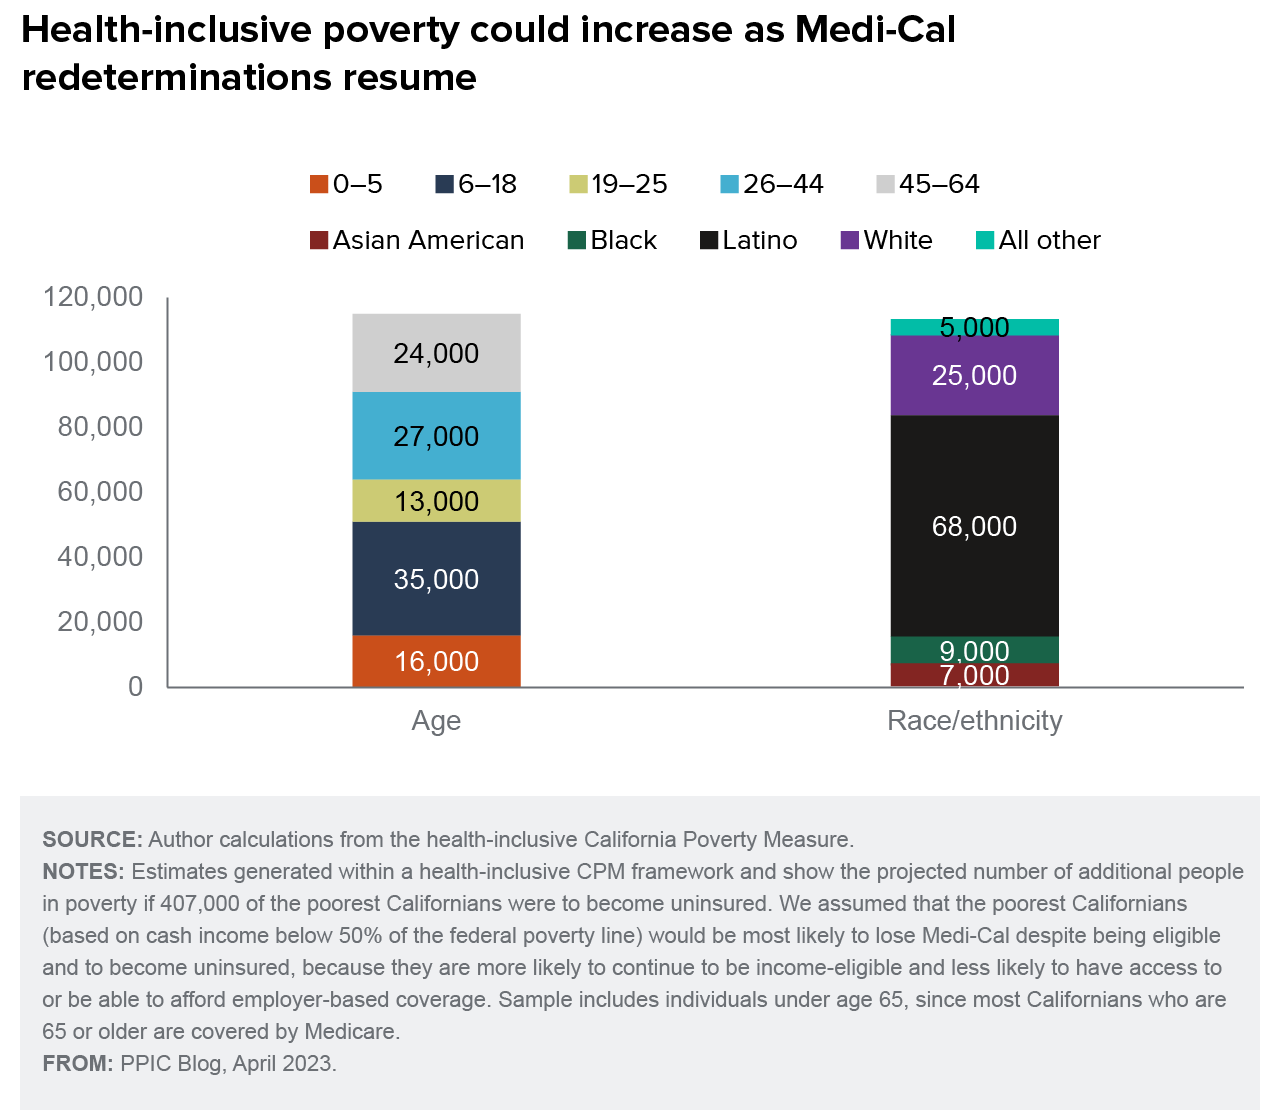 figure - Health-inclusive poverty could increase as Medi-Cal redeterminations resume